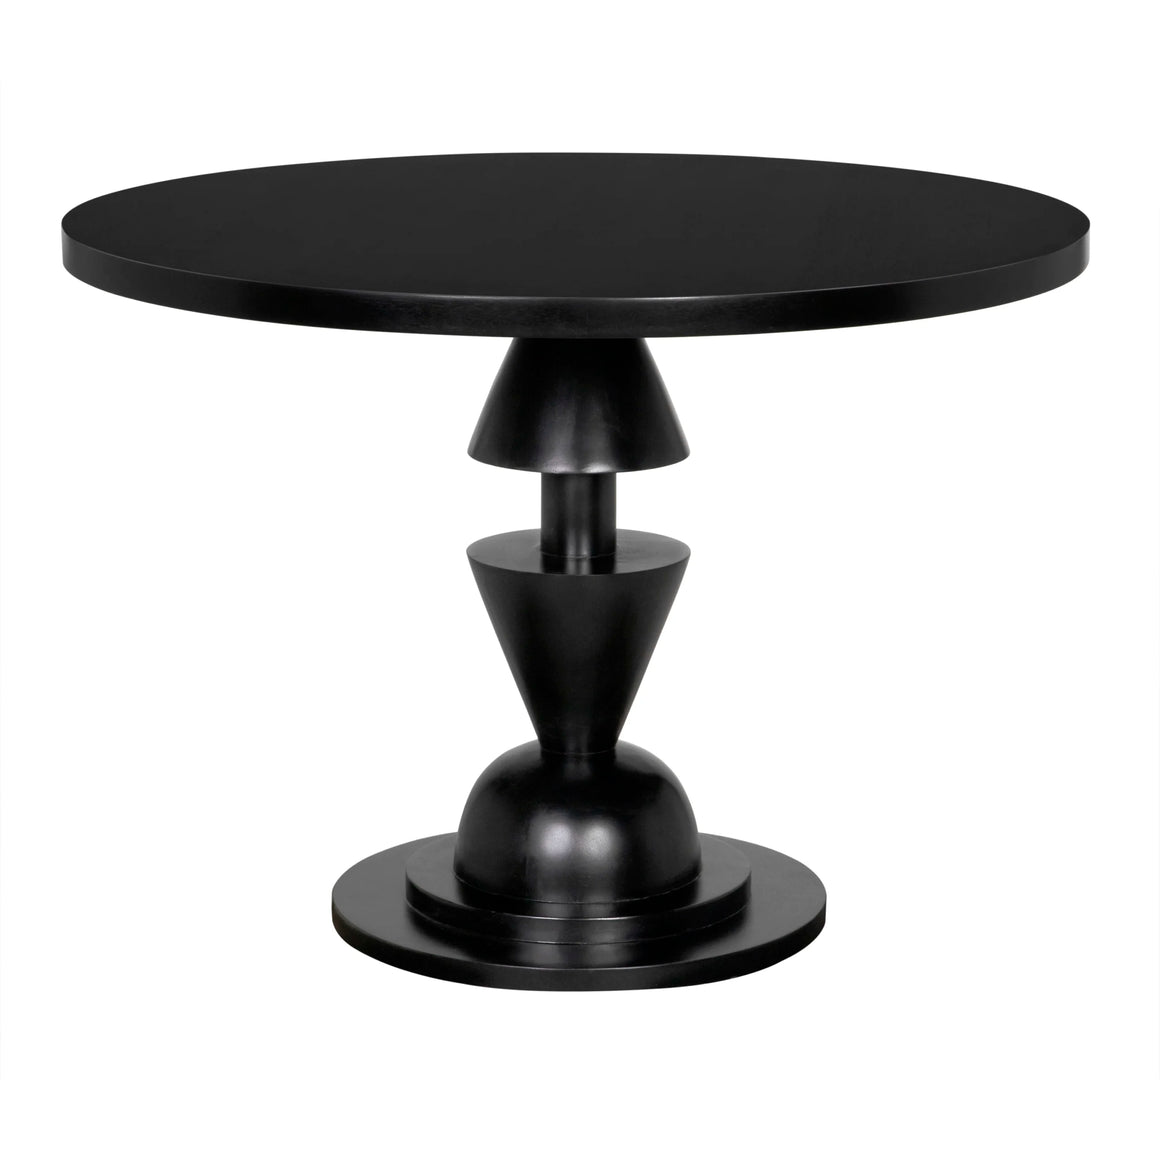 Varick Table, Hand Rubbed Black